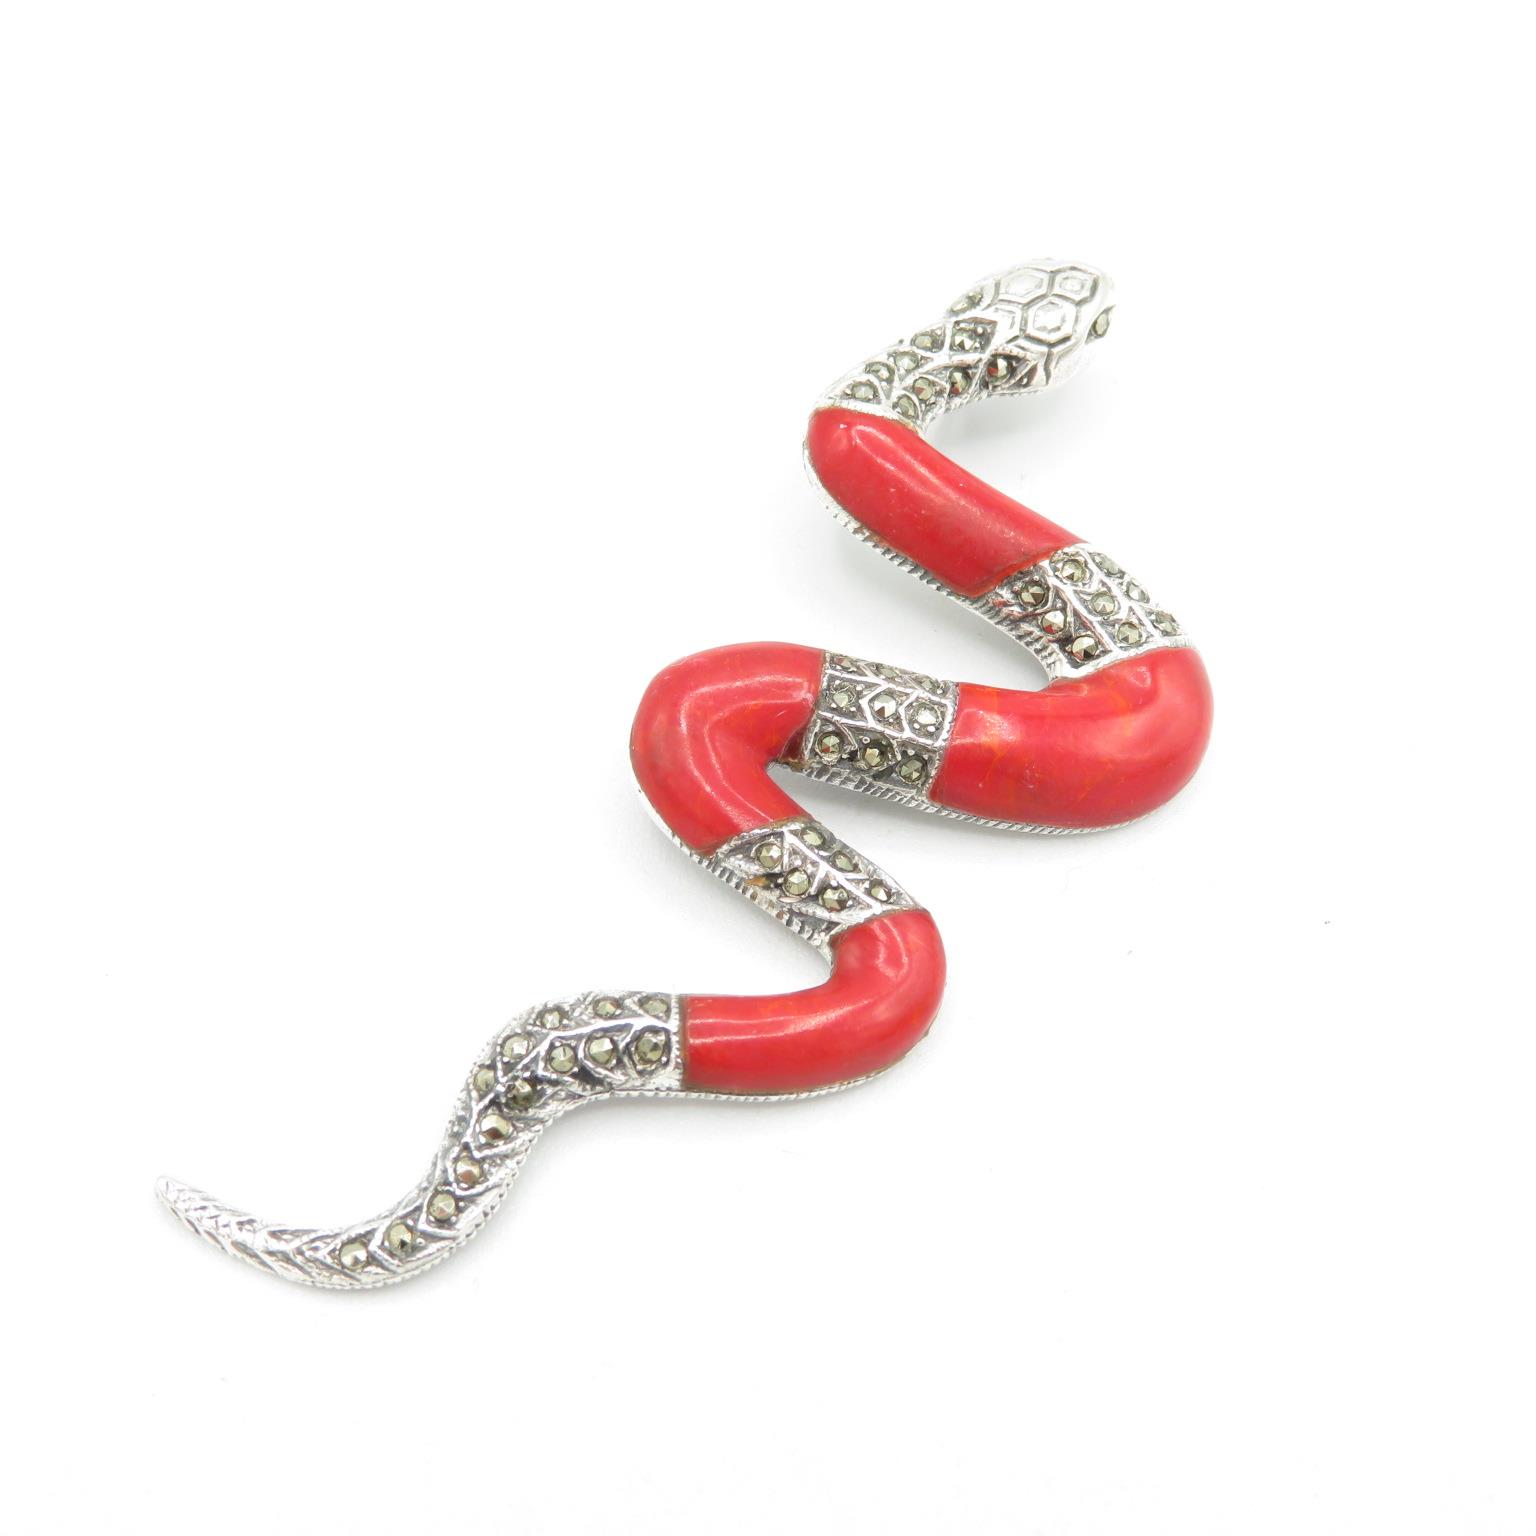 HM Sterling Silver 925 Snake pendant set with red stones and stone eyes (10.6g) In excellent